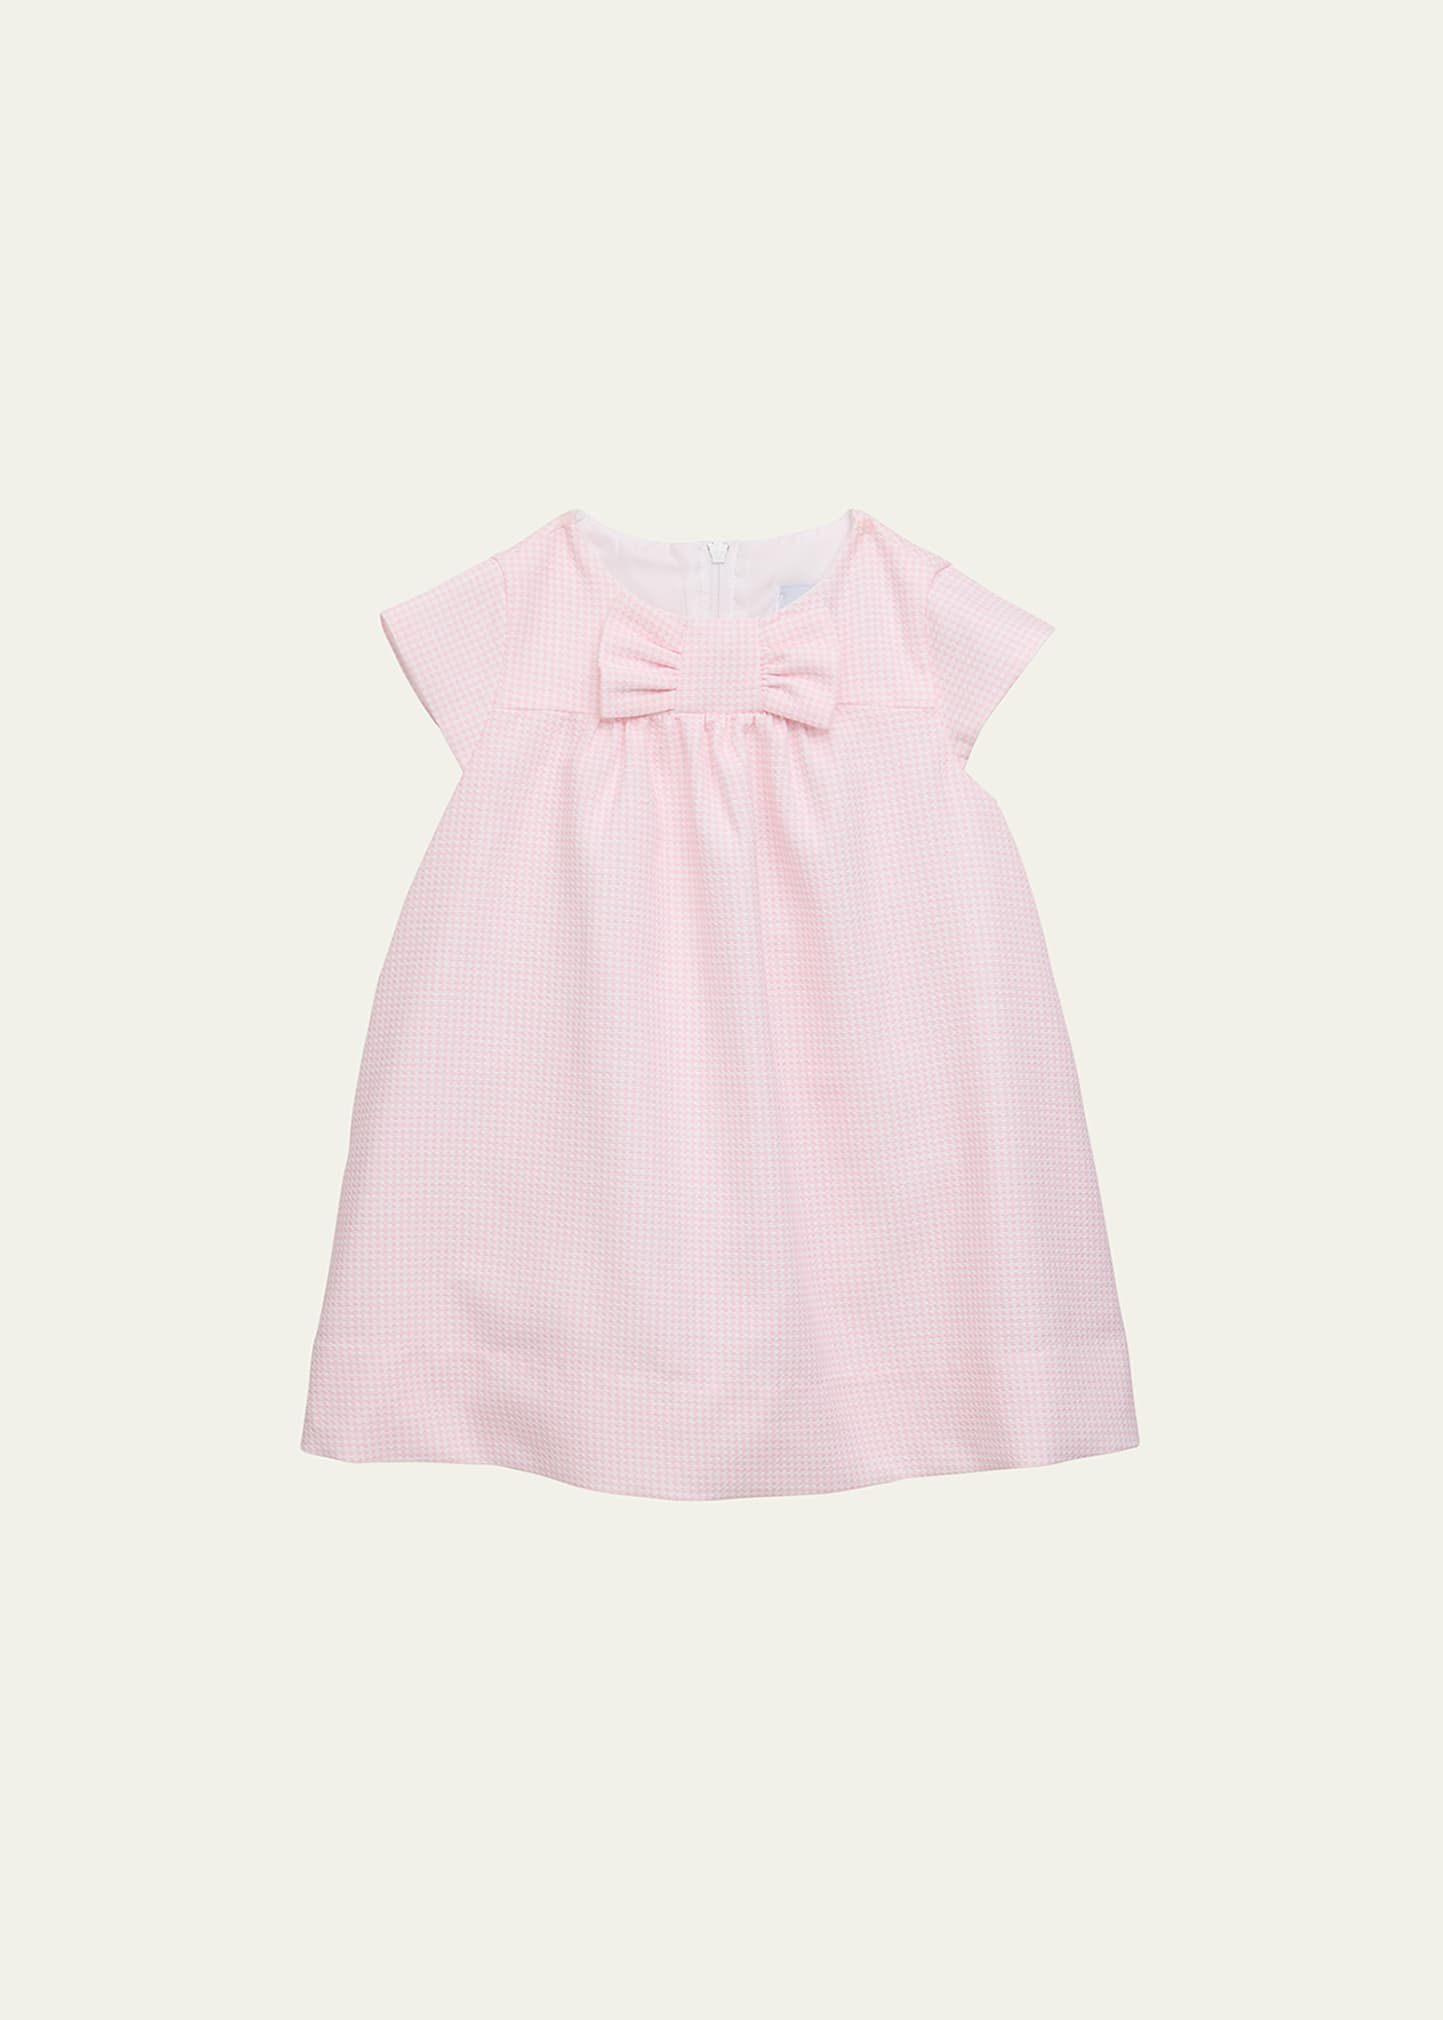 Girl's Pique Dress with Bow, Size 6M-24M